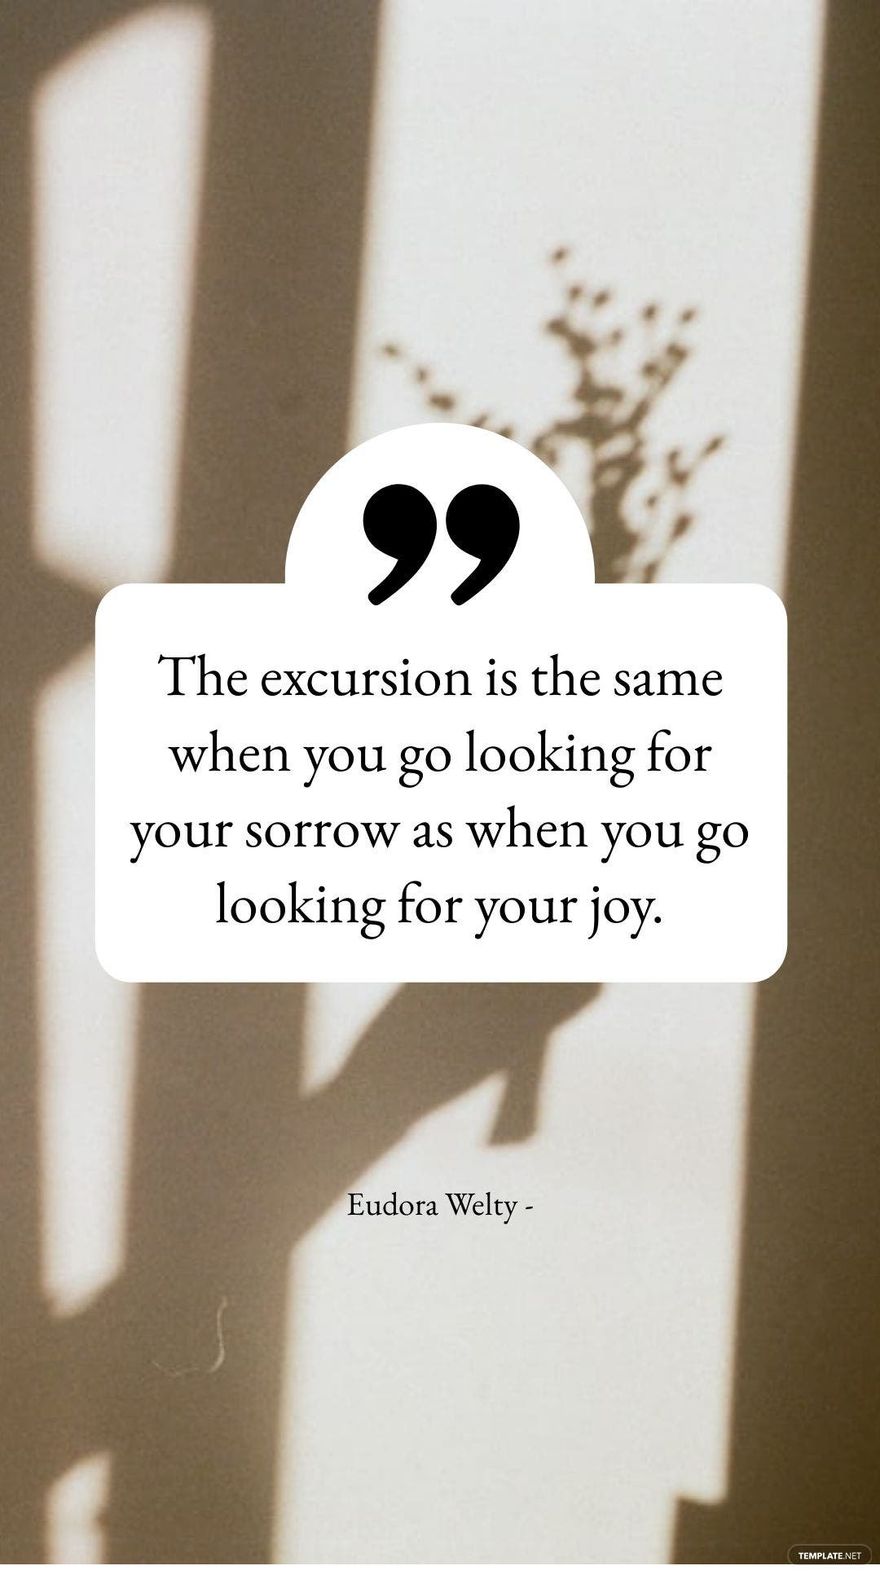 Eudora Welty - The excursion is the same when you go looking for your sorrow as when you go looking for your joy.